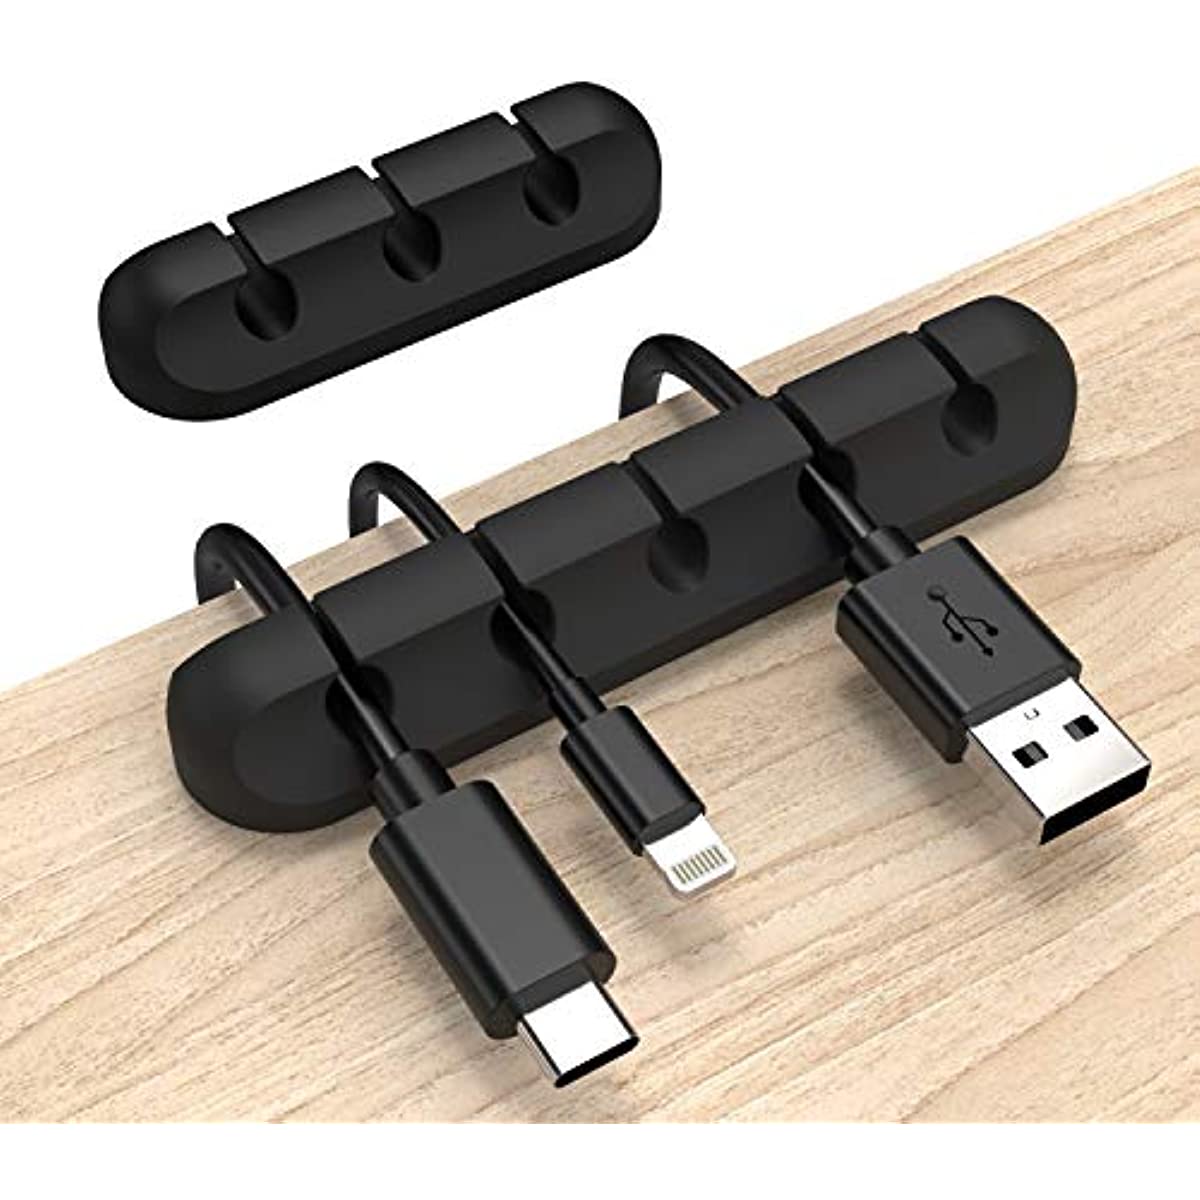 Cord Organizer. Cable Clips Cord Holder. Cable Management USB Cable Power Wire Cord Clips. 2 Packs Cable Organizers for Car Home and Office (5. 3 Slots)